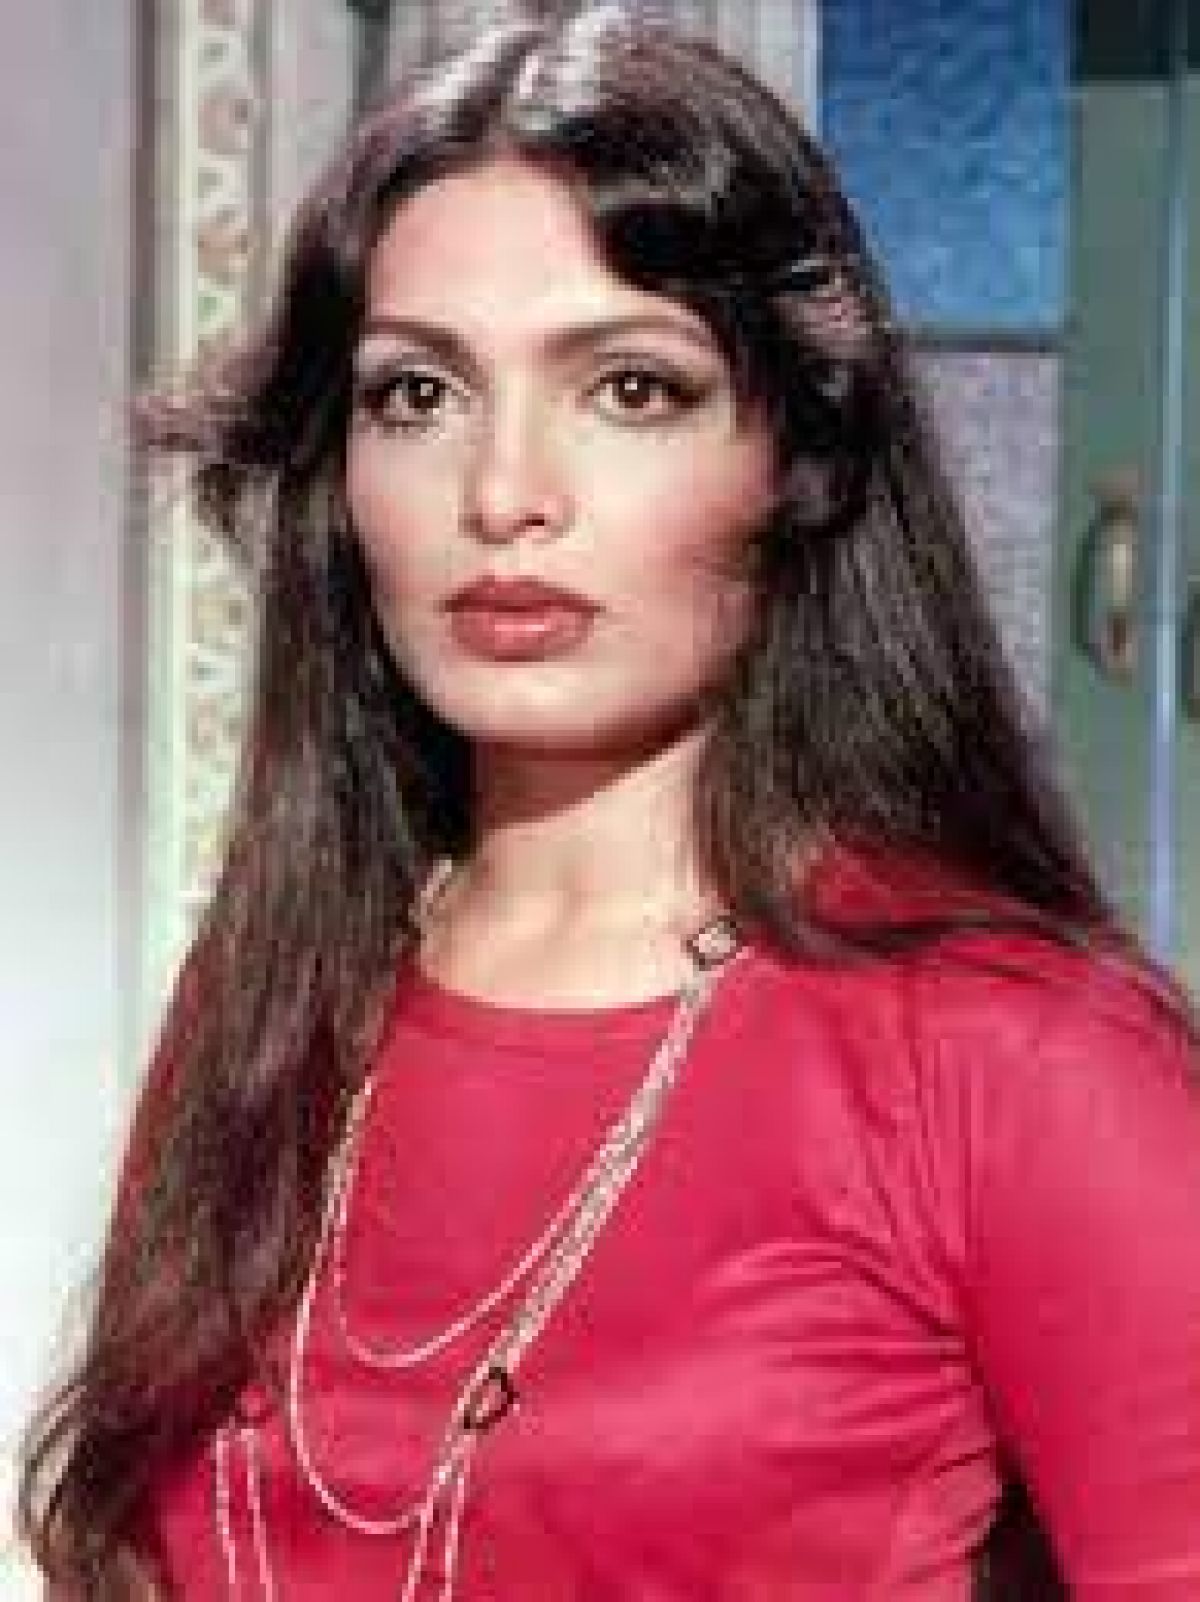 When Parveen Bobby ran on the road in half clothes to stop Mahesh Bhatt